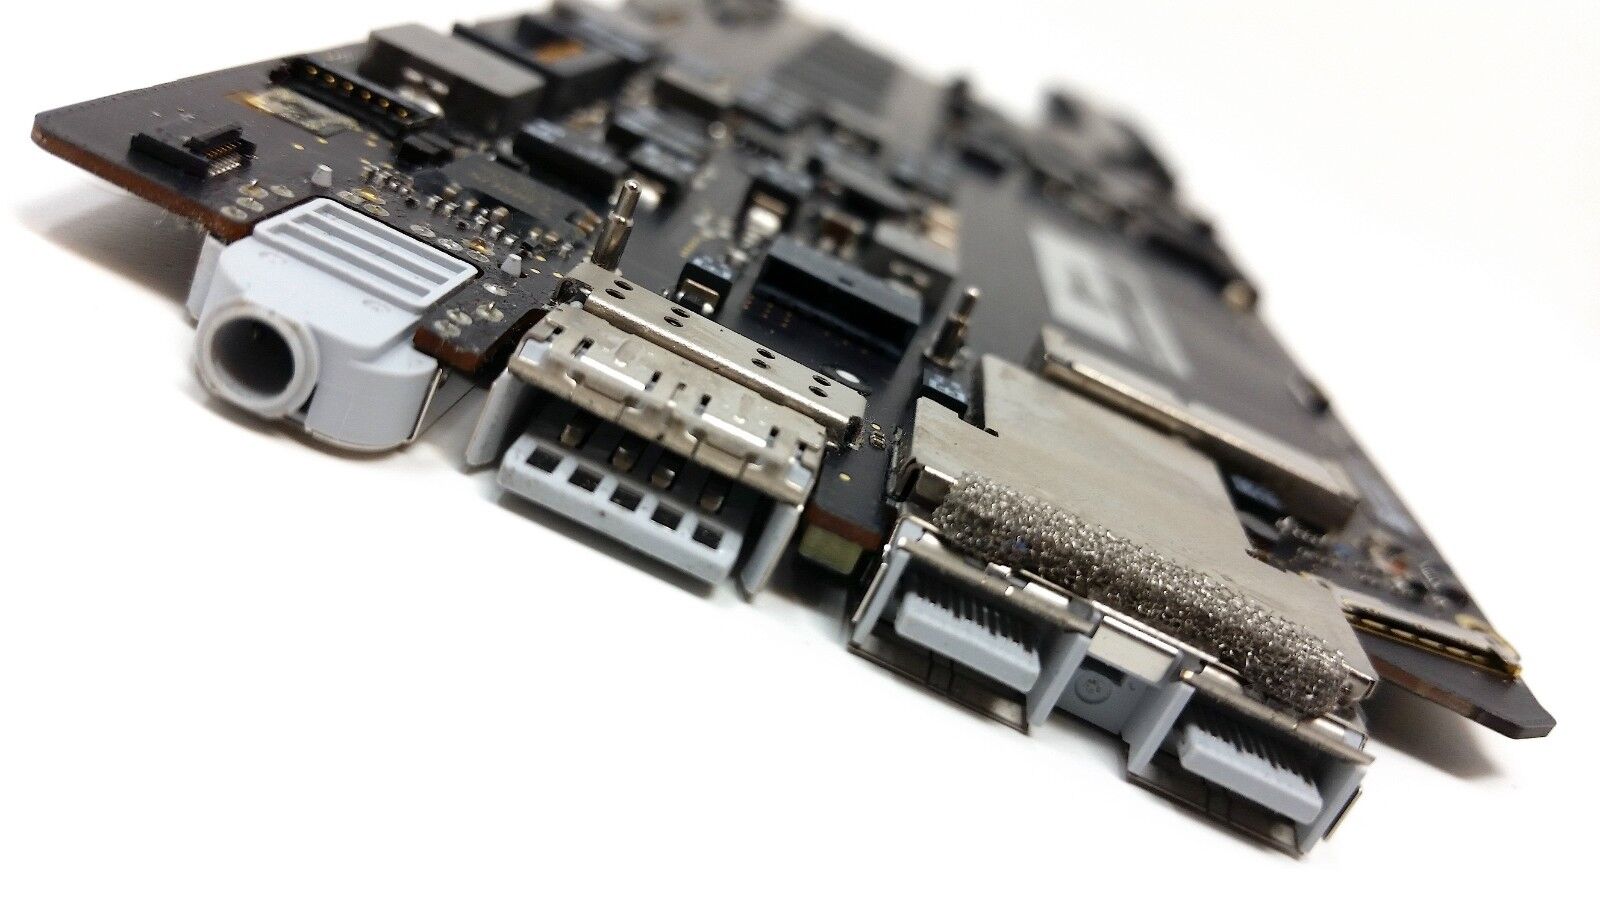 Apple macbook pro 13 logic board making of a nation voice of america